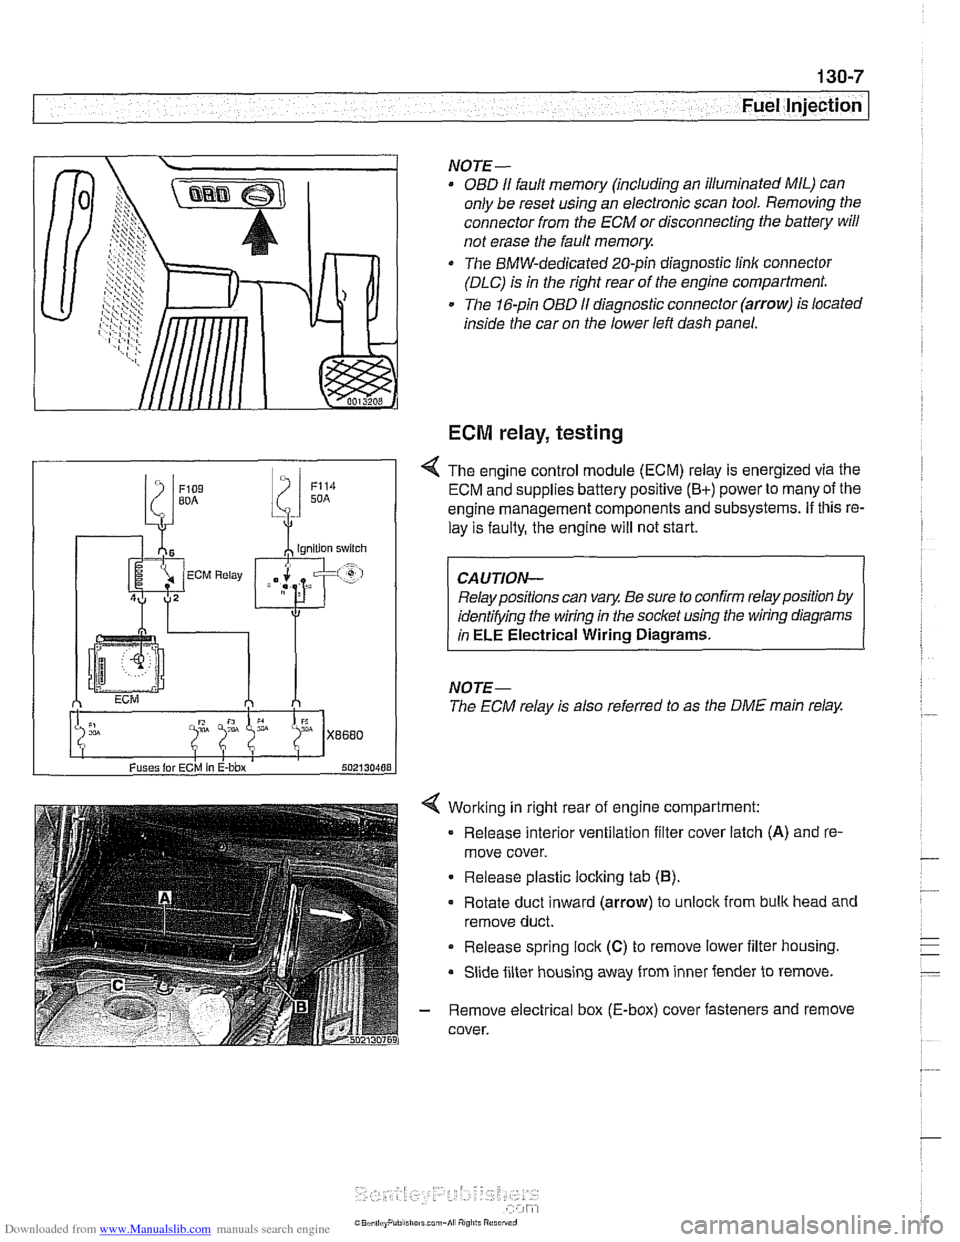 BMW 525i 2001 E39 Workshop Manual Downloaded from www.Manualslib.com manuals search engine 
Fuel Injection 1 
Working in right  rear of engine compartment: 
Release interior  ventilation filter cover  latch 
(A) and re- 
move cover. 
